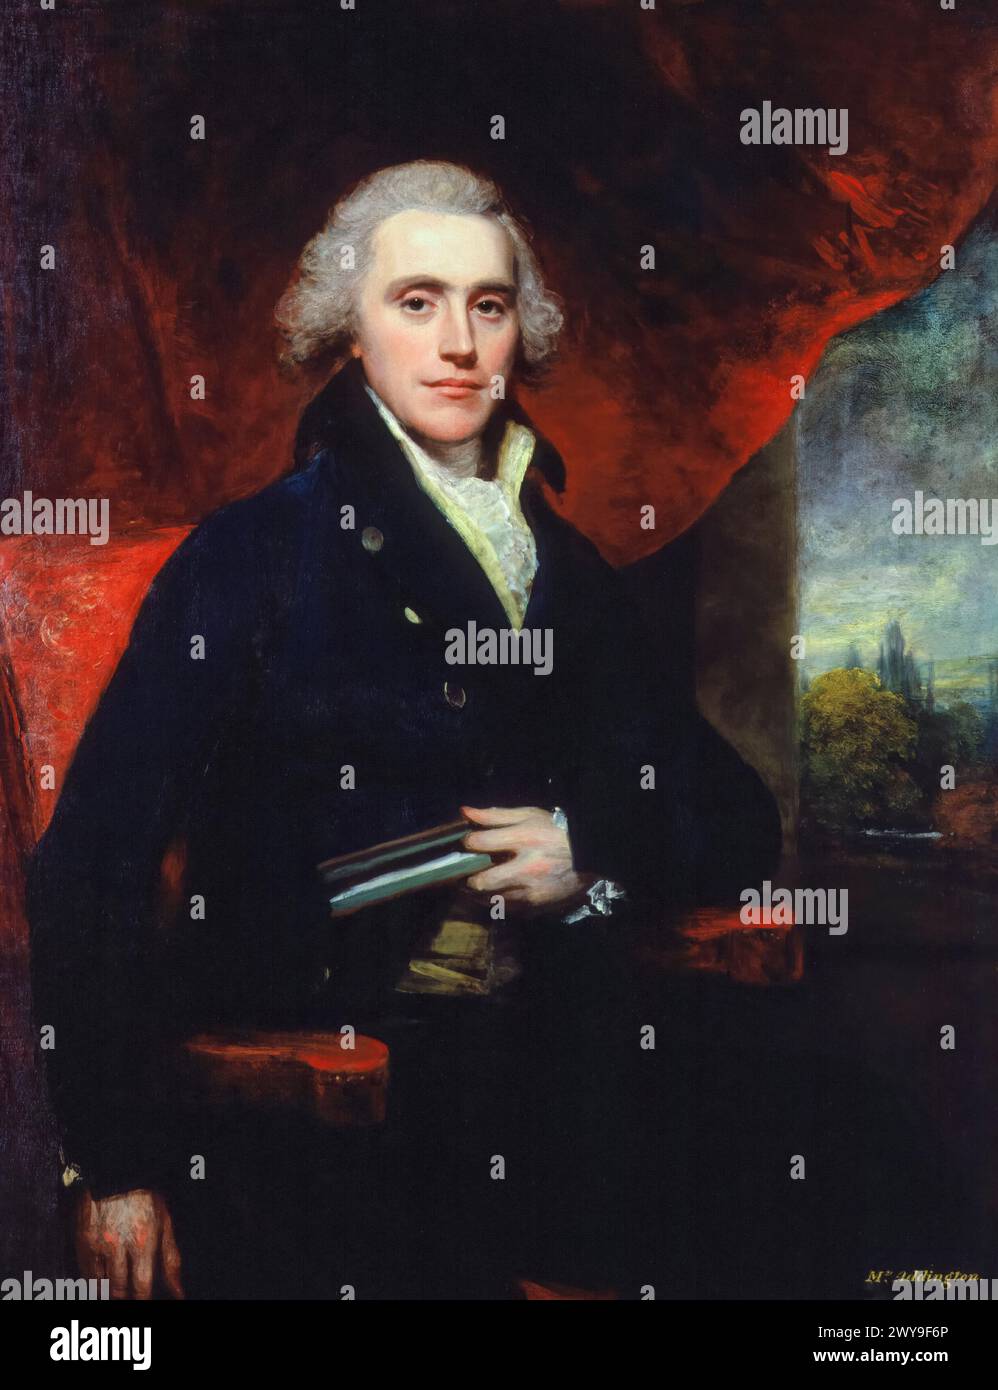 Henry Addington, 1st Viscount Sidmouth (1757-1844), Tory politician and Prime Minister of the United Kingdom, 1801-1804, portrait painting in oil on canvas by Sir William Beechey, circa 1803 Stock Photo